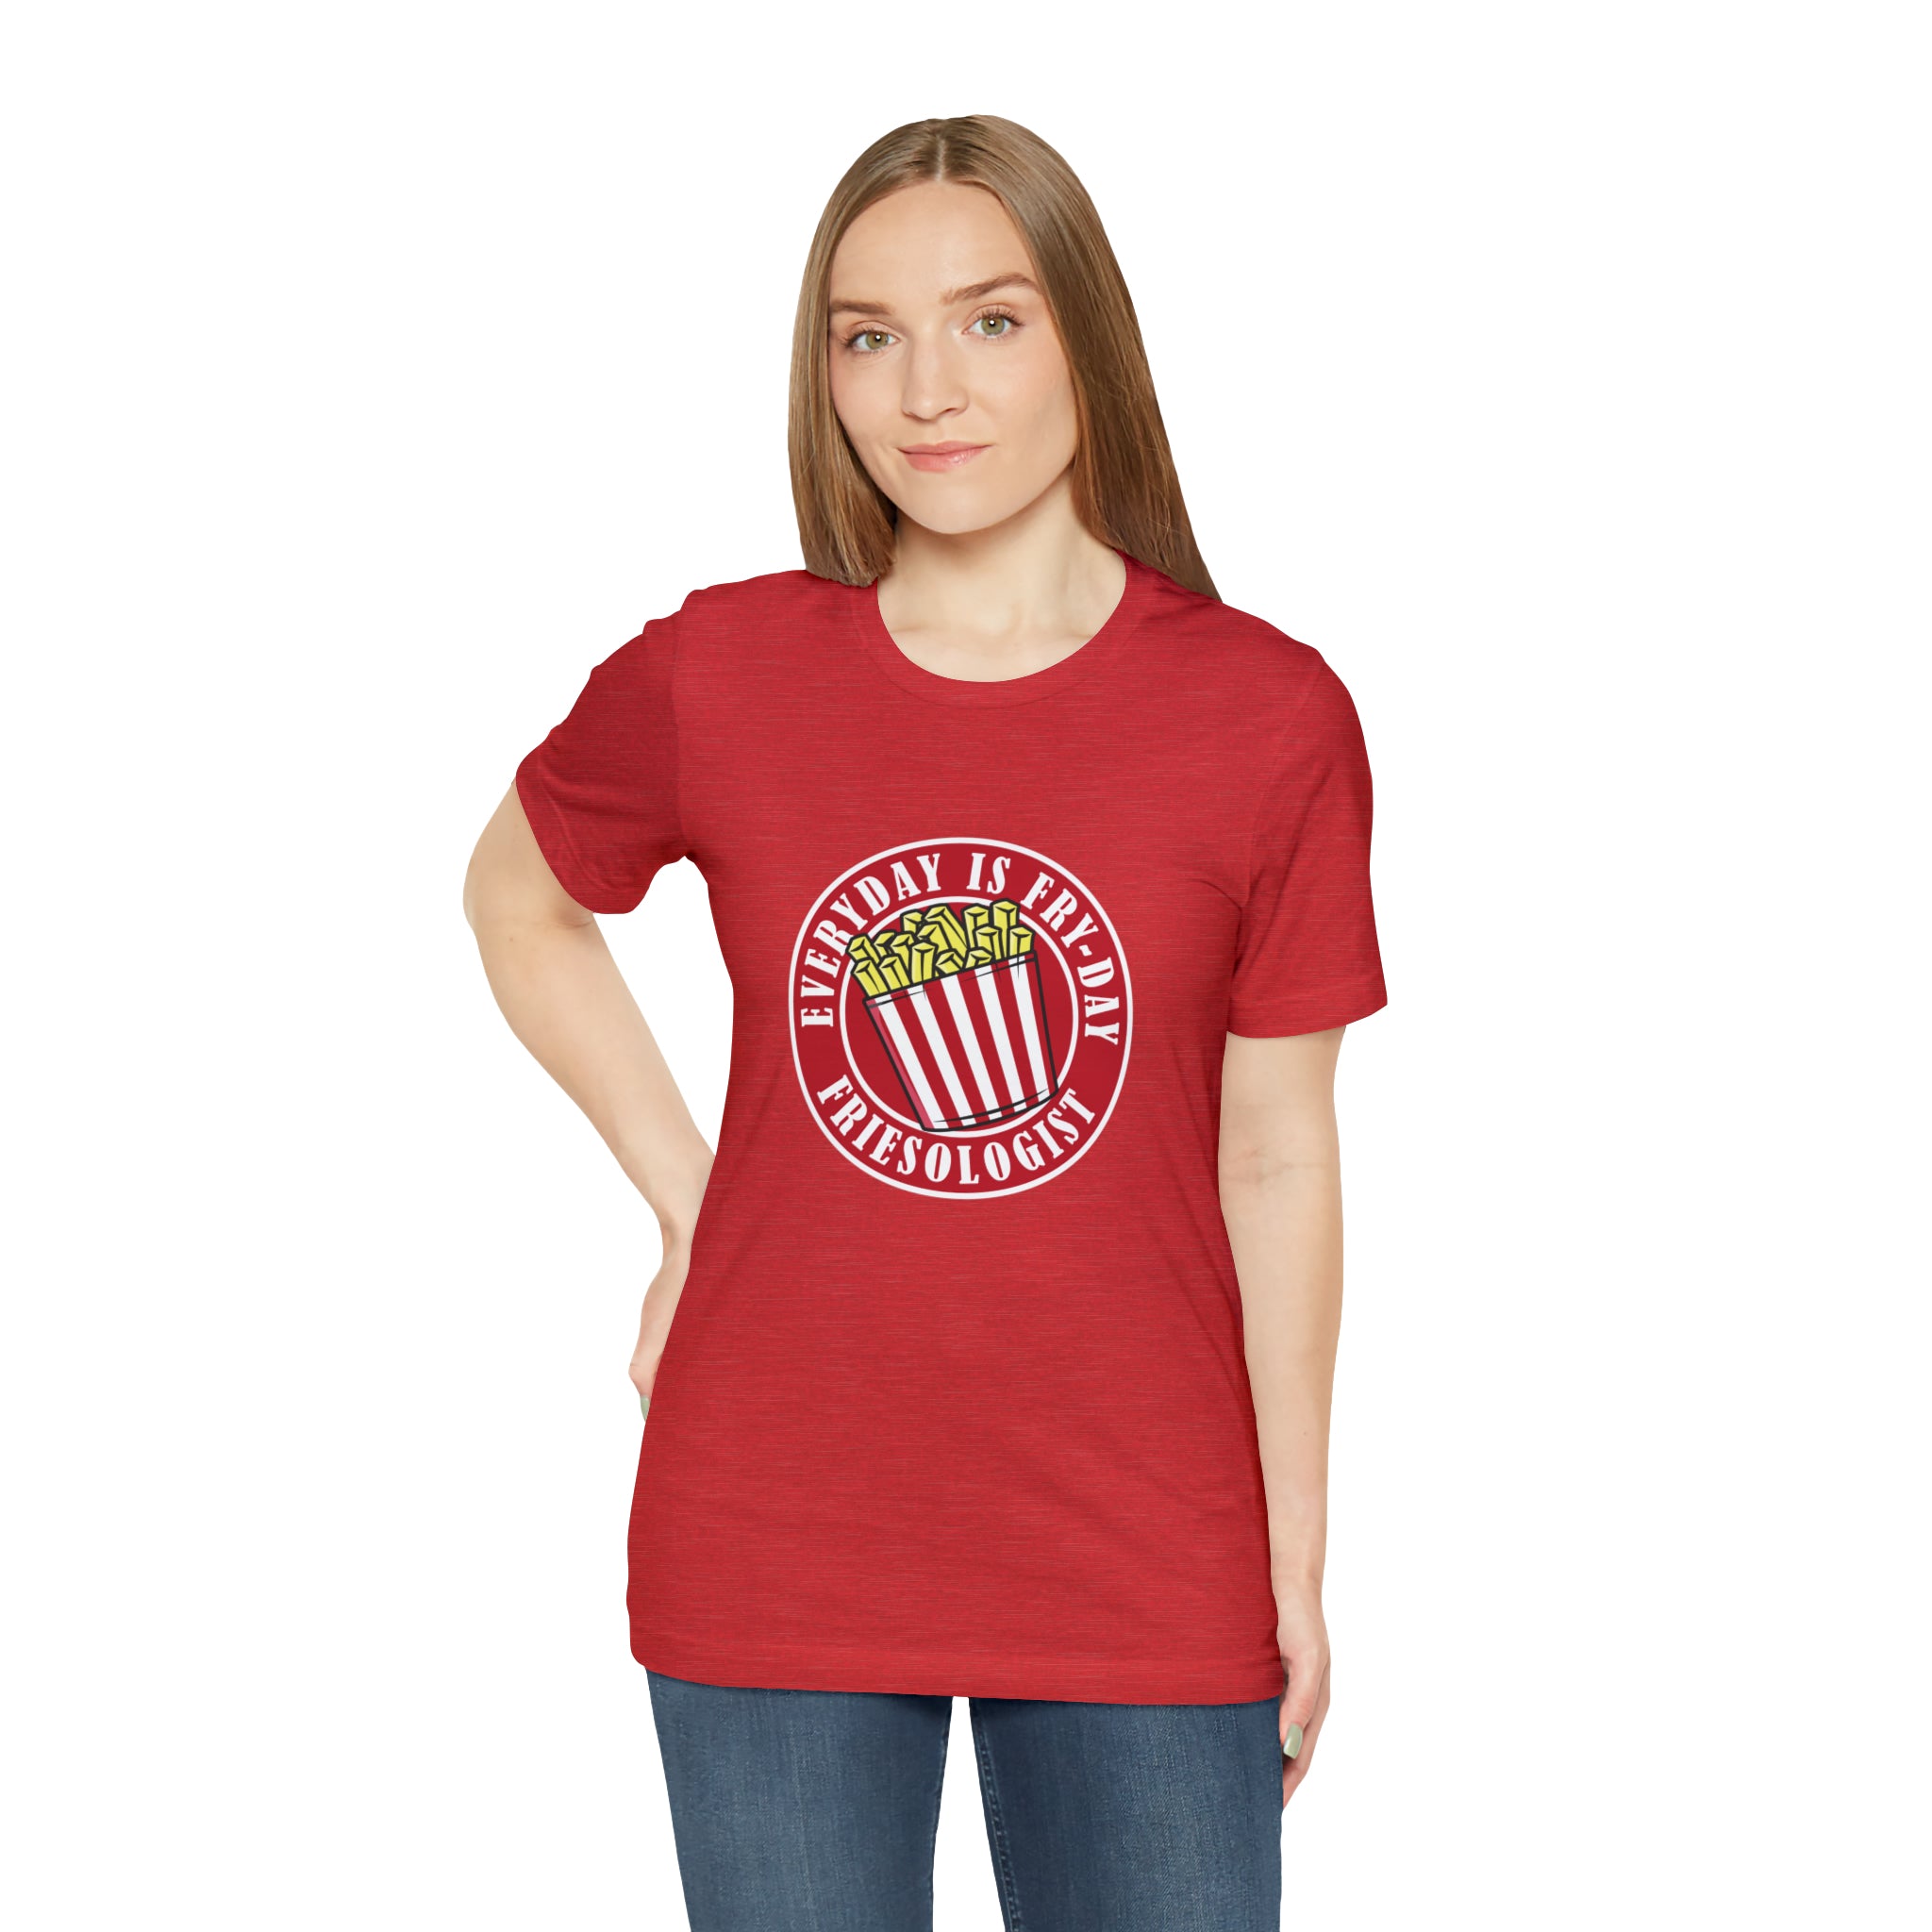 Everyday is Fry-day - Friesologist T-Shirt